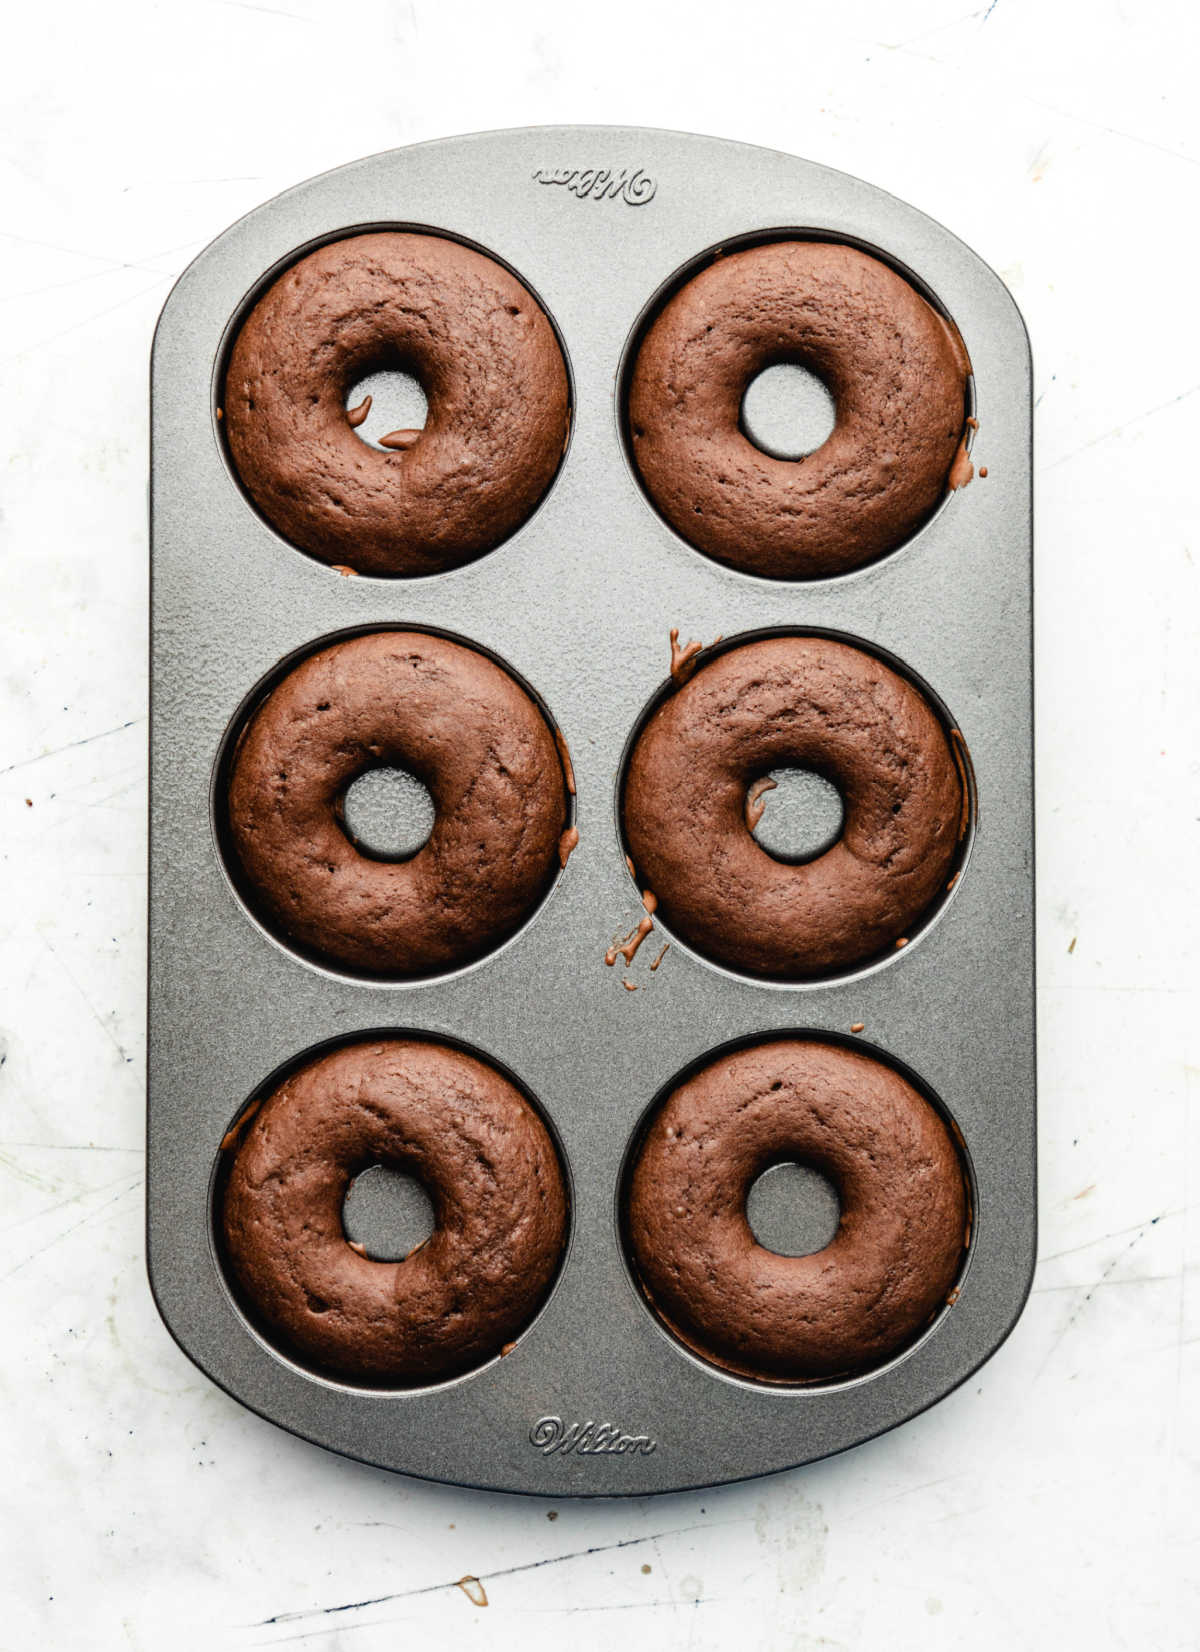 Baked chocolate buttermilk donuts in a donut pan. 